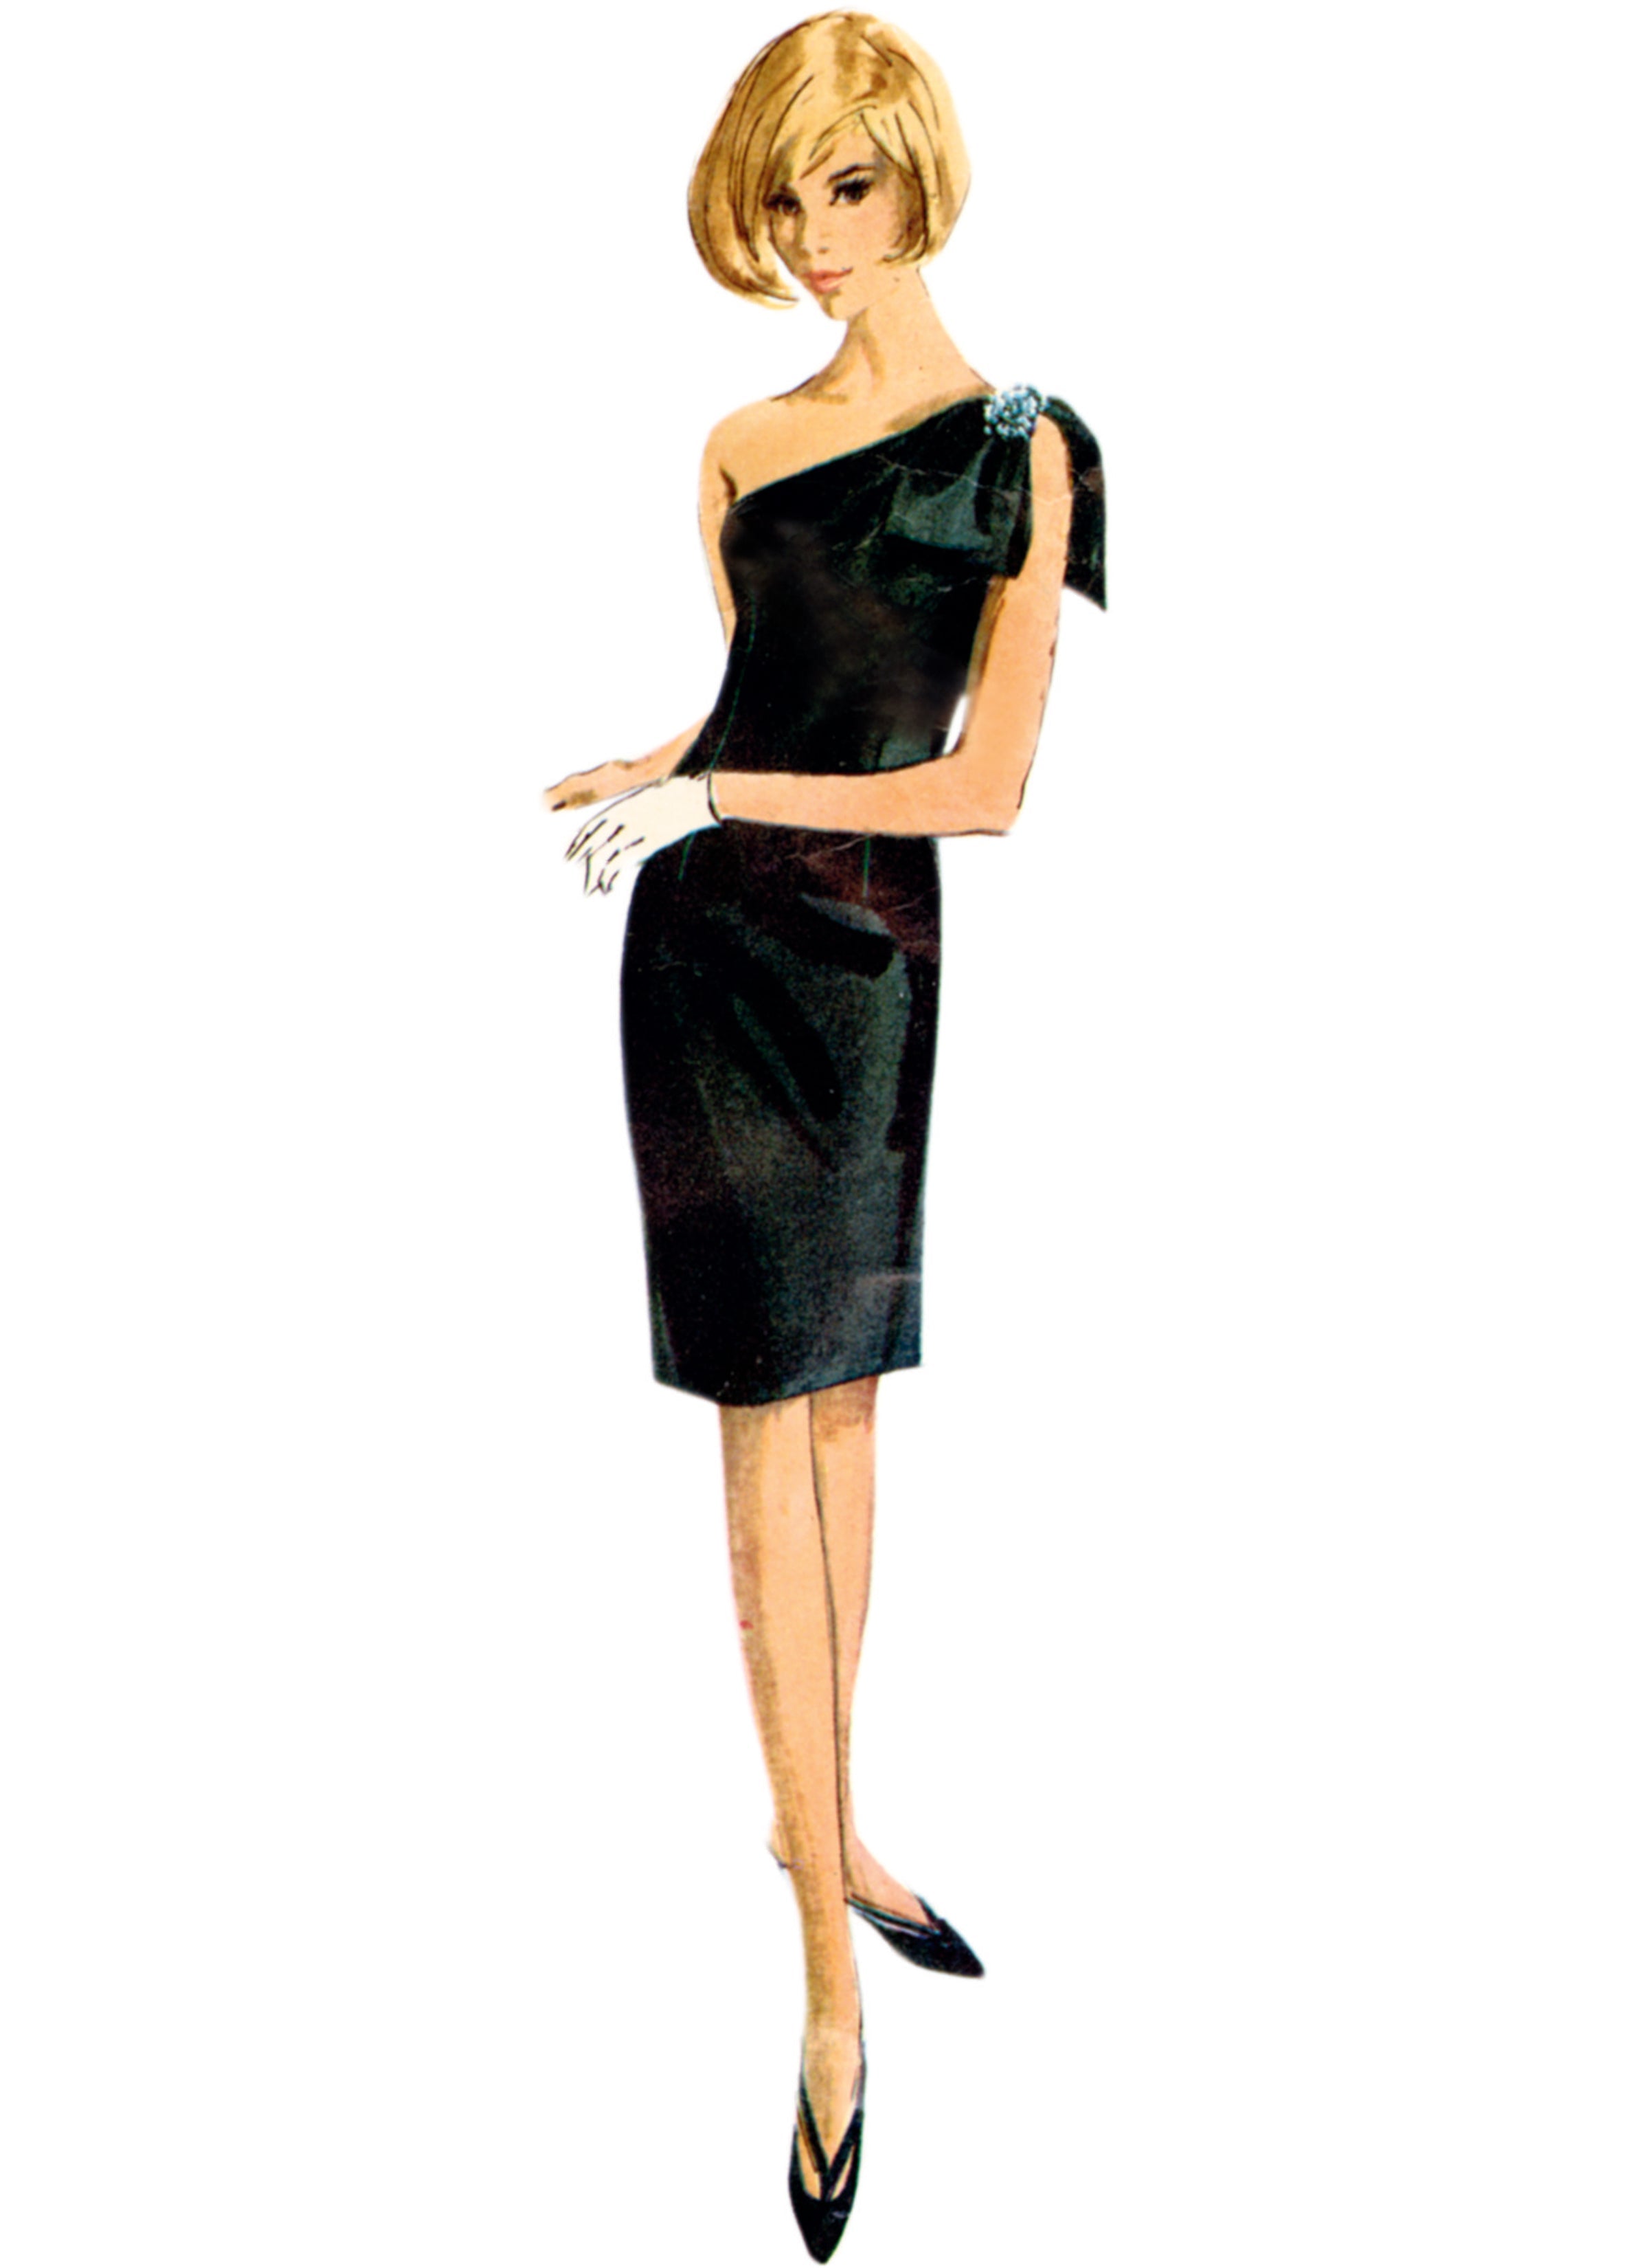 Simplicity Sewing Pattern 9916 Misses' Dress in Two Lengths from Jaycotts Sewing Supplies